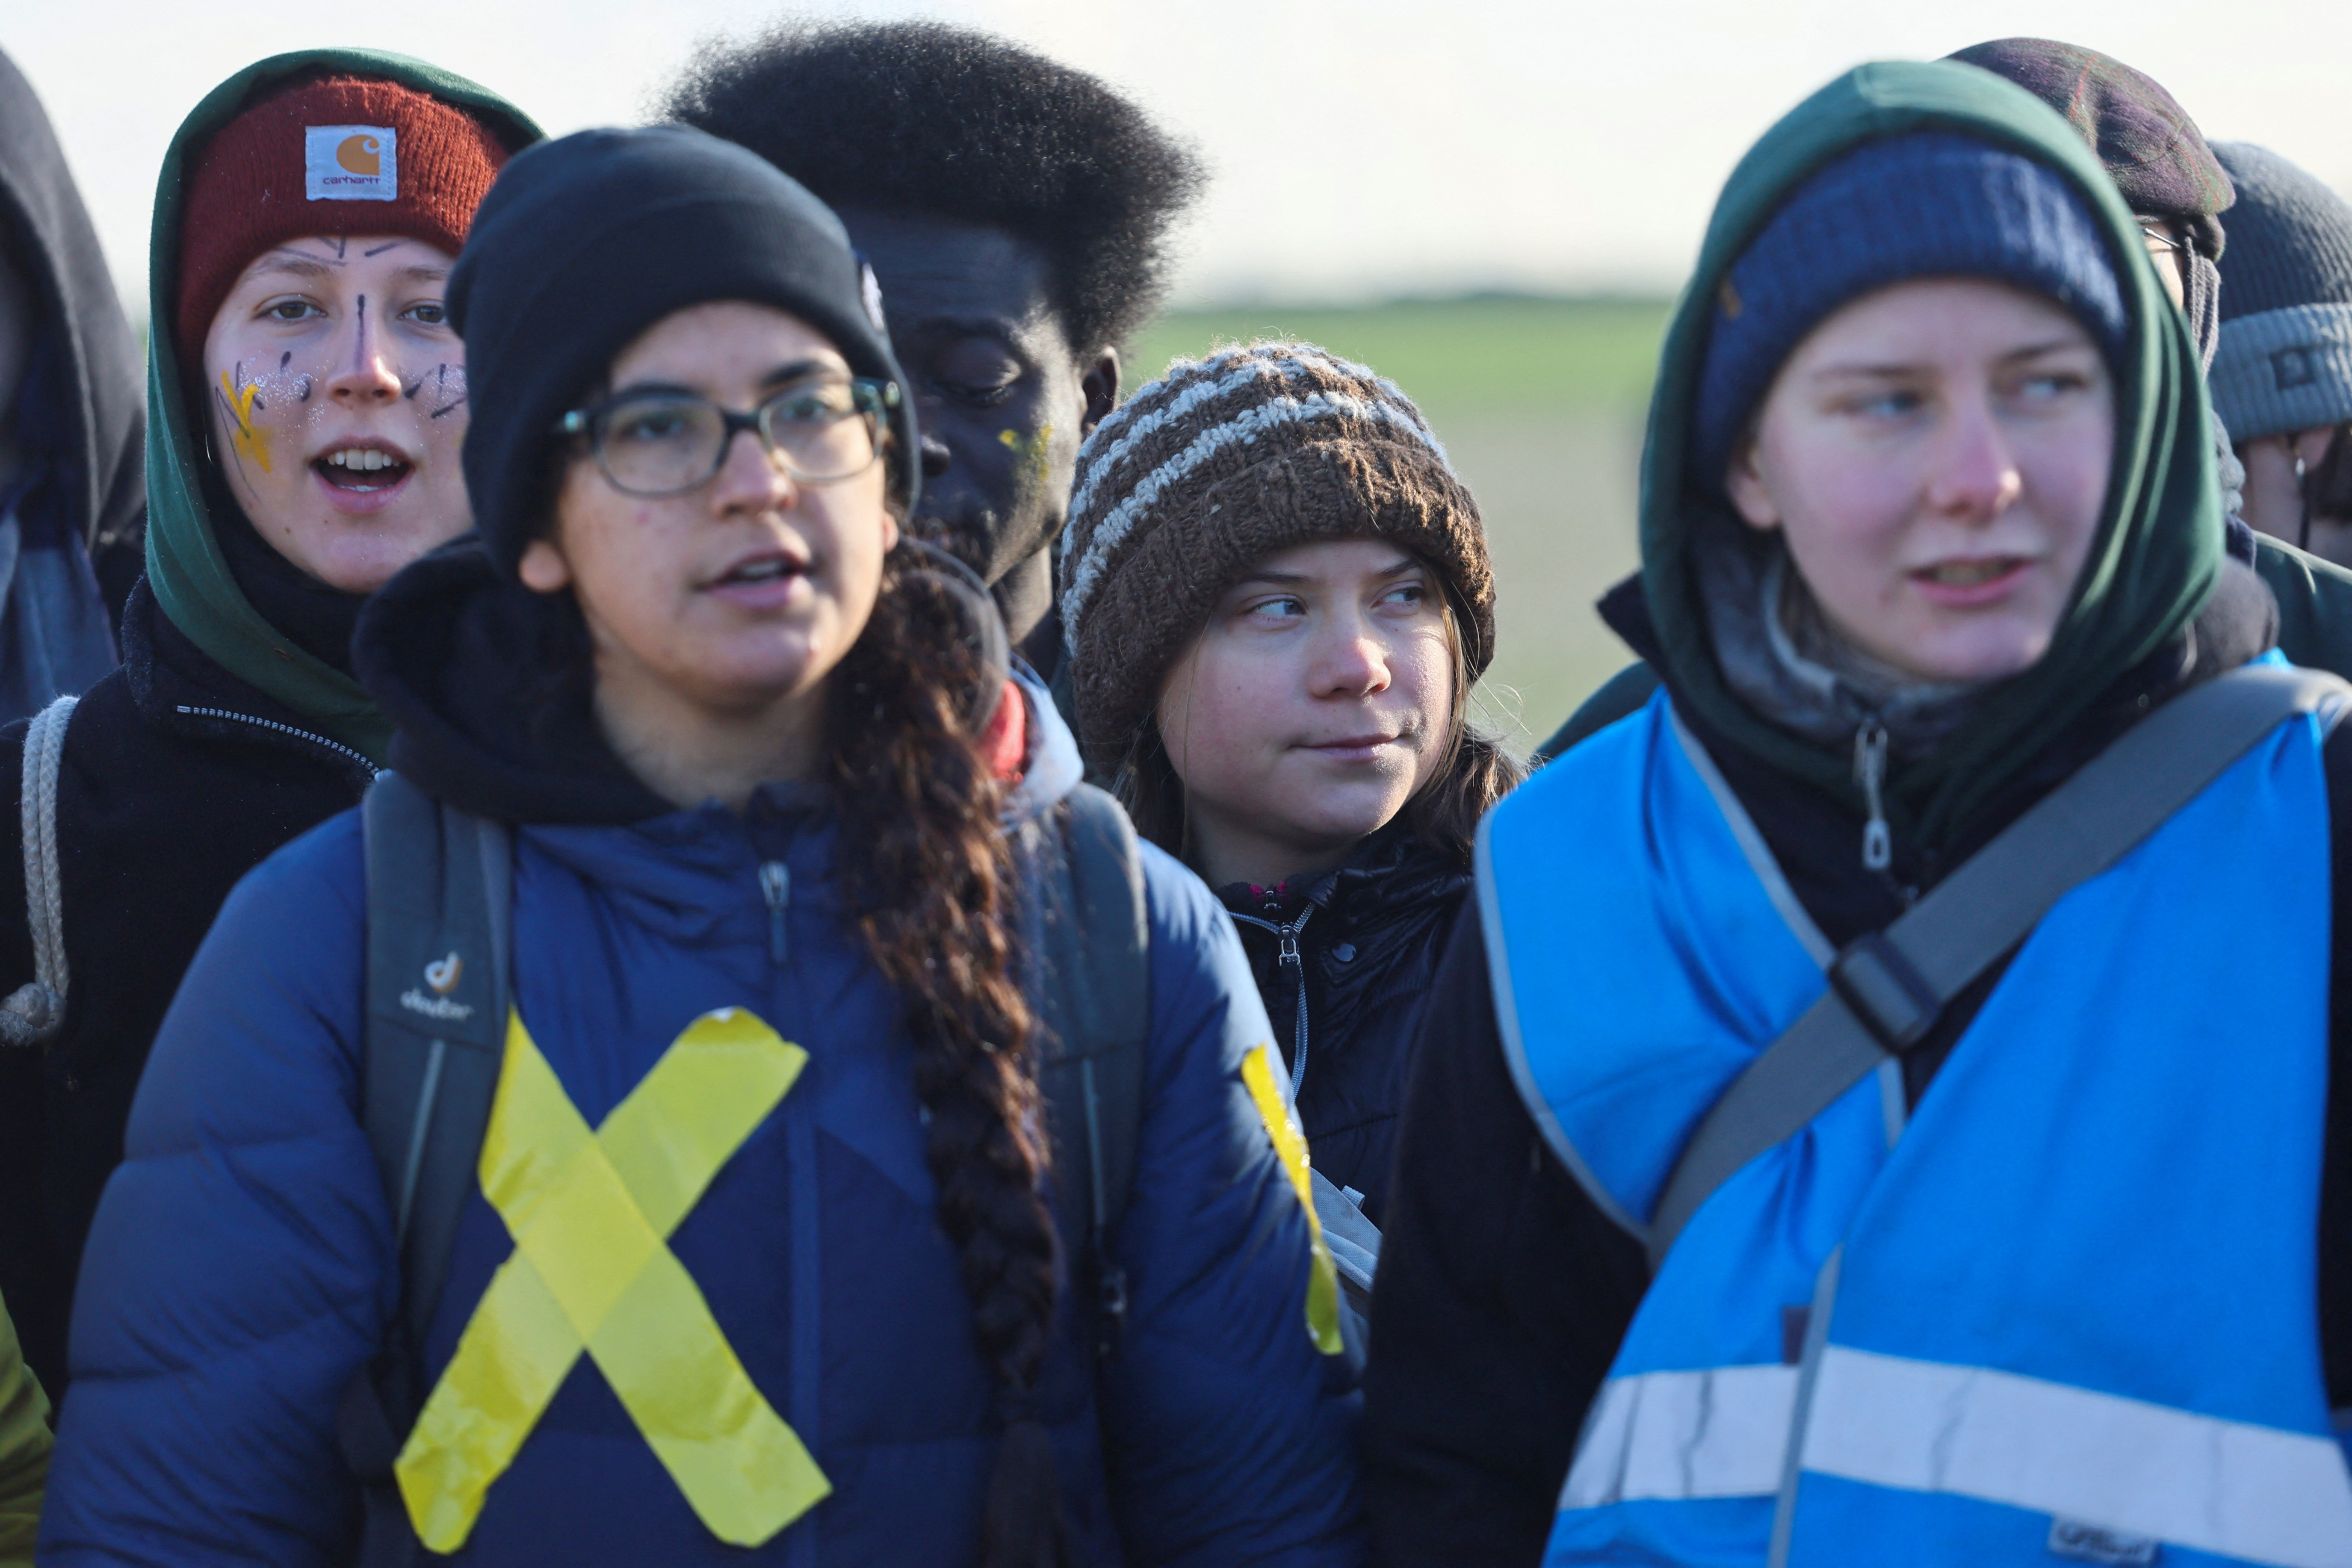 Protest against the expansion of the Garzweiler open-cast lignite mine of Germany's utility RWE to Luetzerath